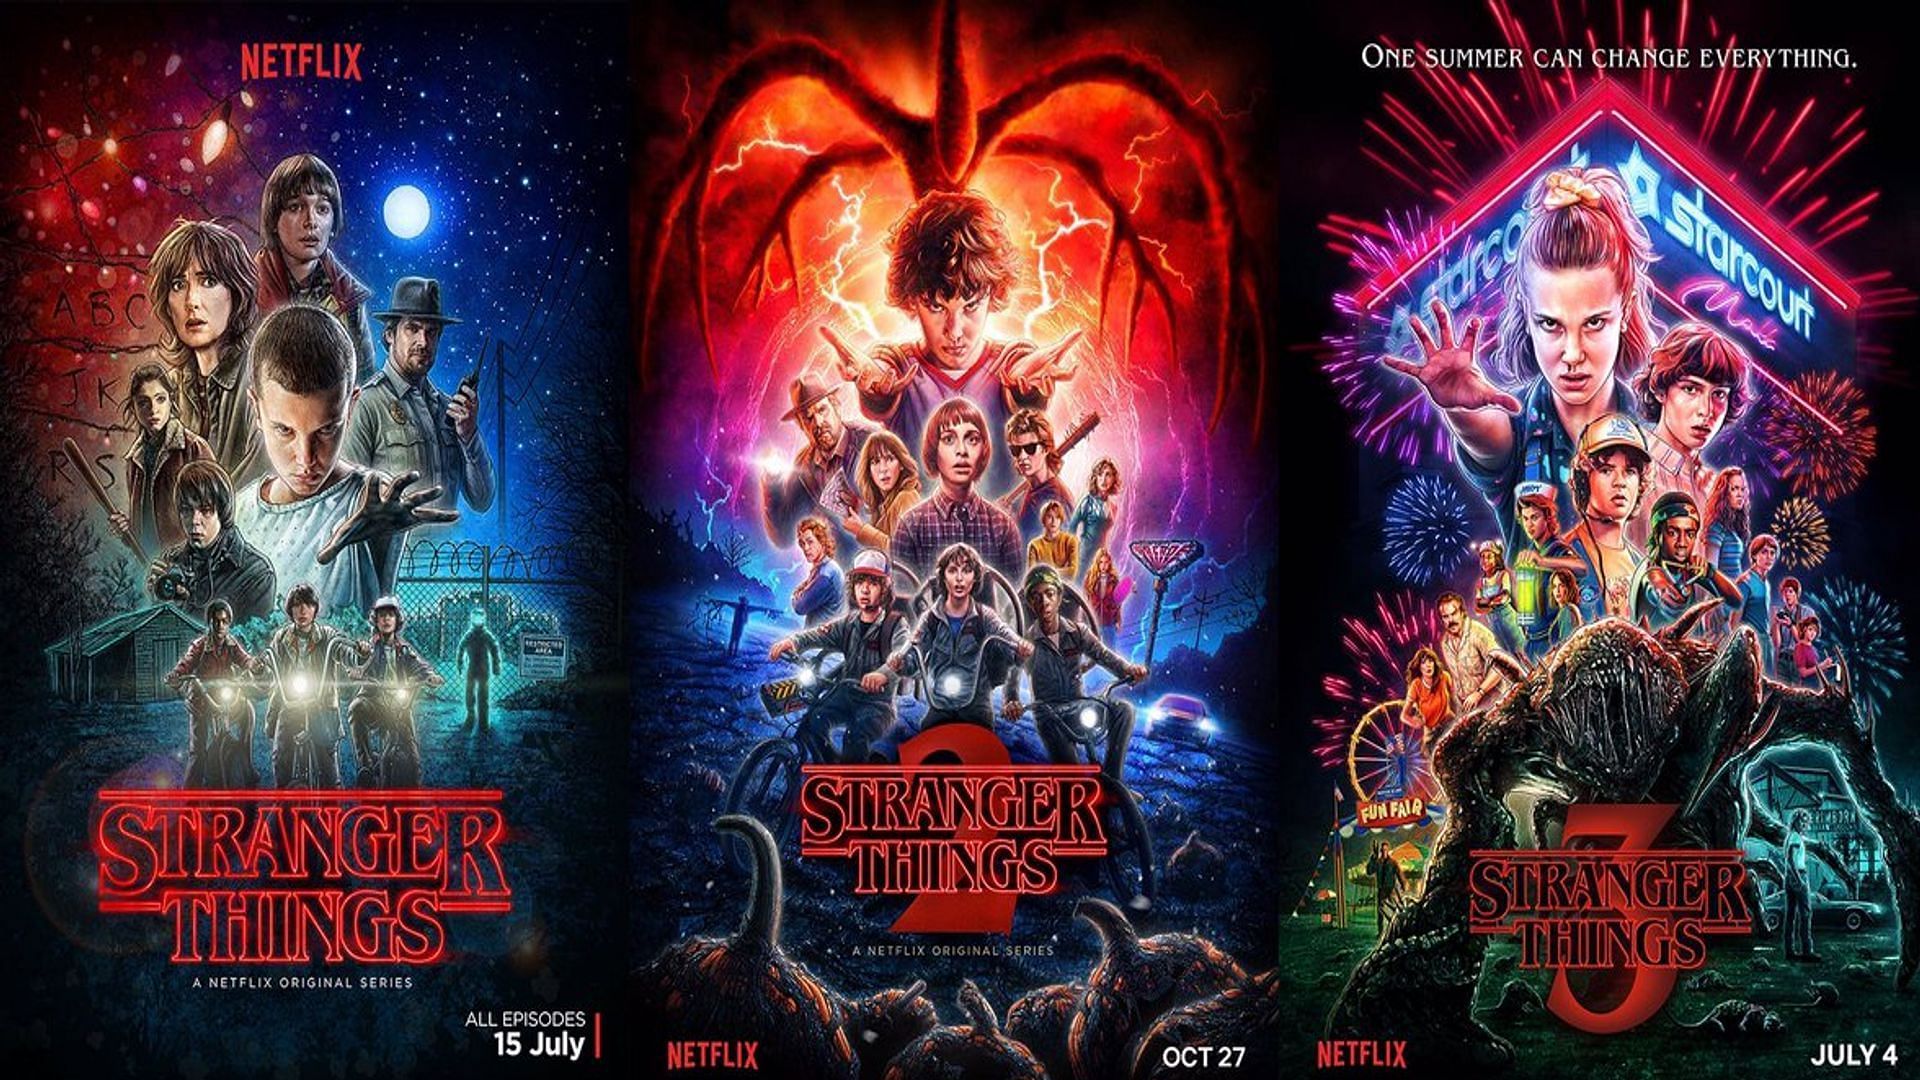 Netflix&#039;s official poster for Stranger Things Season 1,2 and 3 (Image via Netflix)